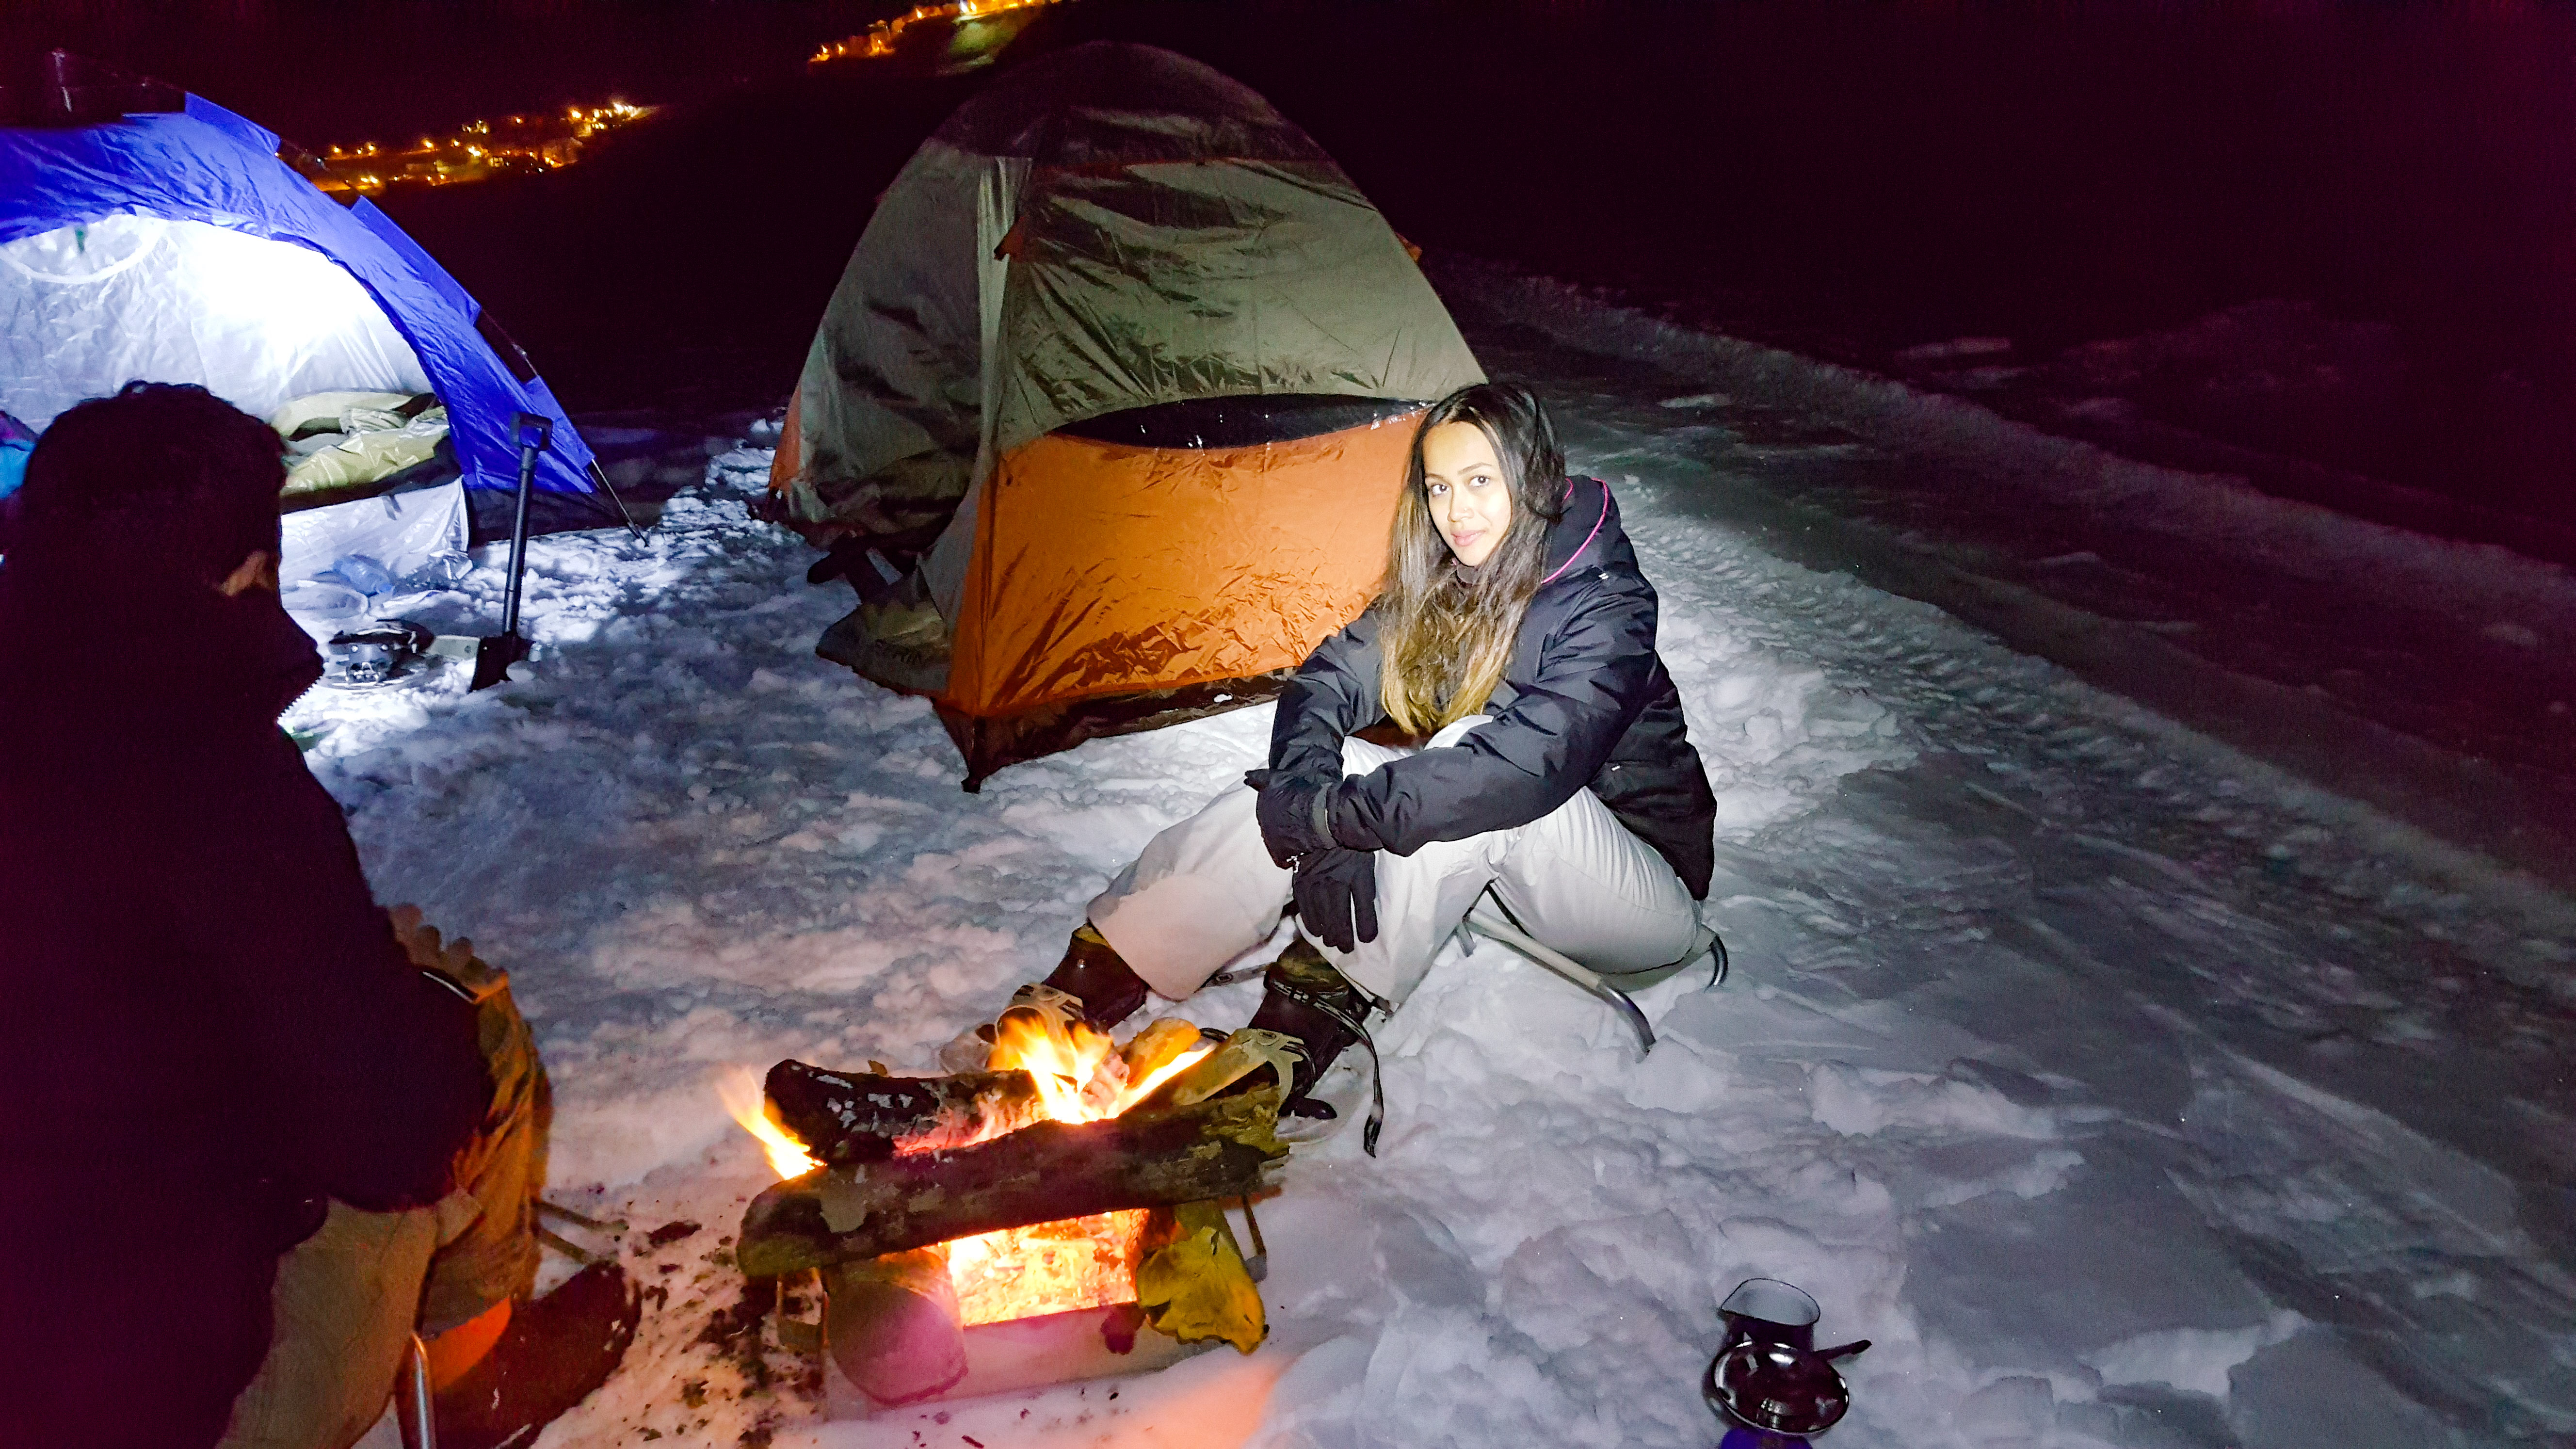 Winter Camping Experience in Lebanon